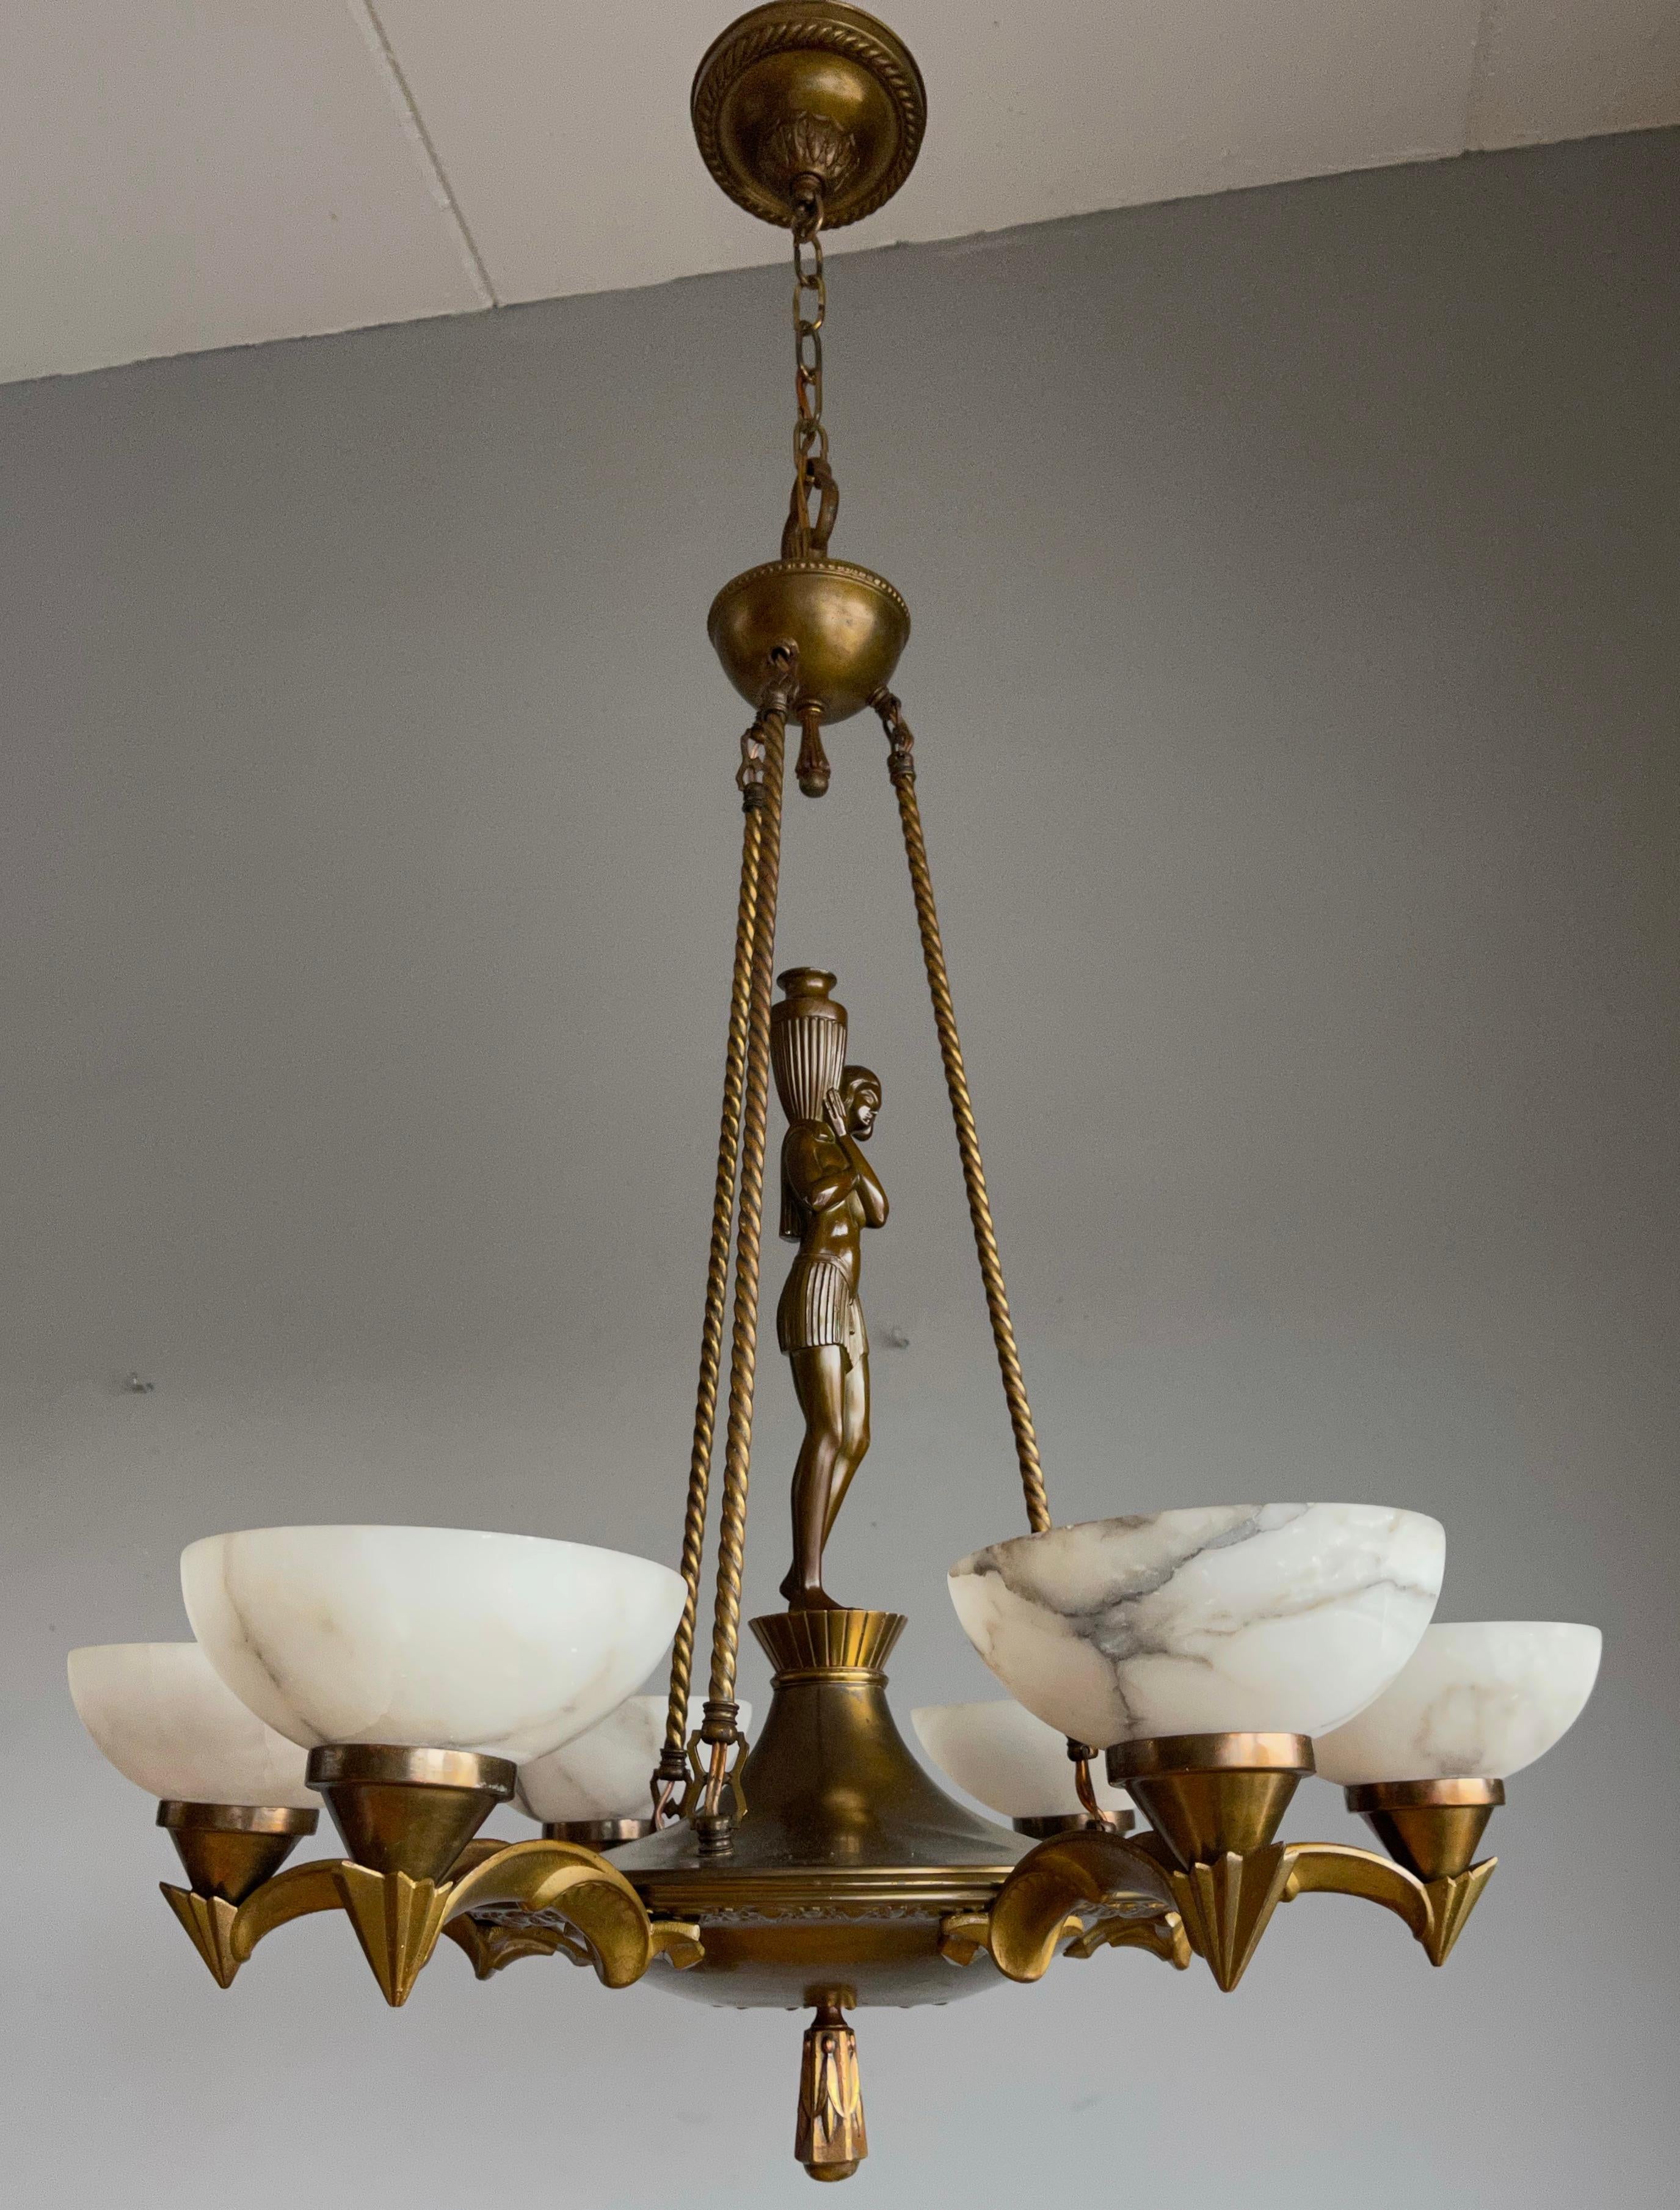 Pure and Stylish Art Deco Sculpture Chandelier w Stunning Alabaster Shades 1920s For Sale 1